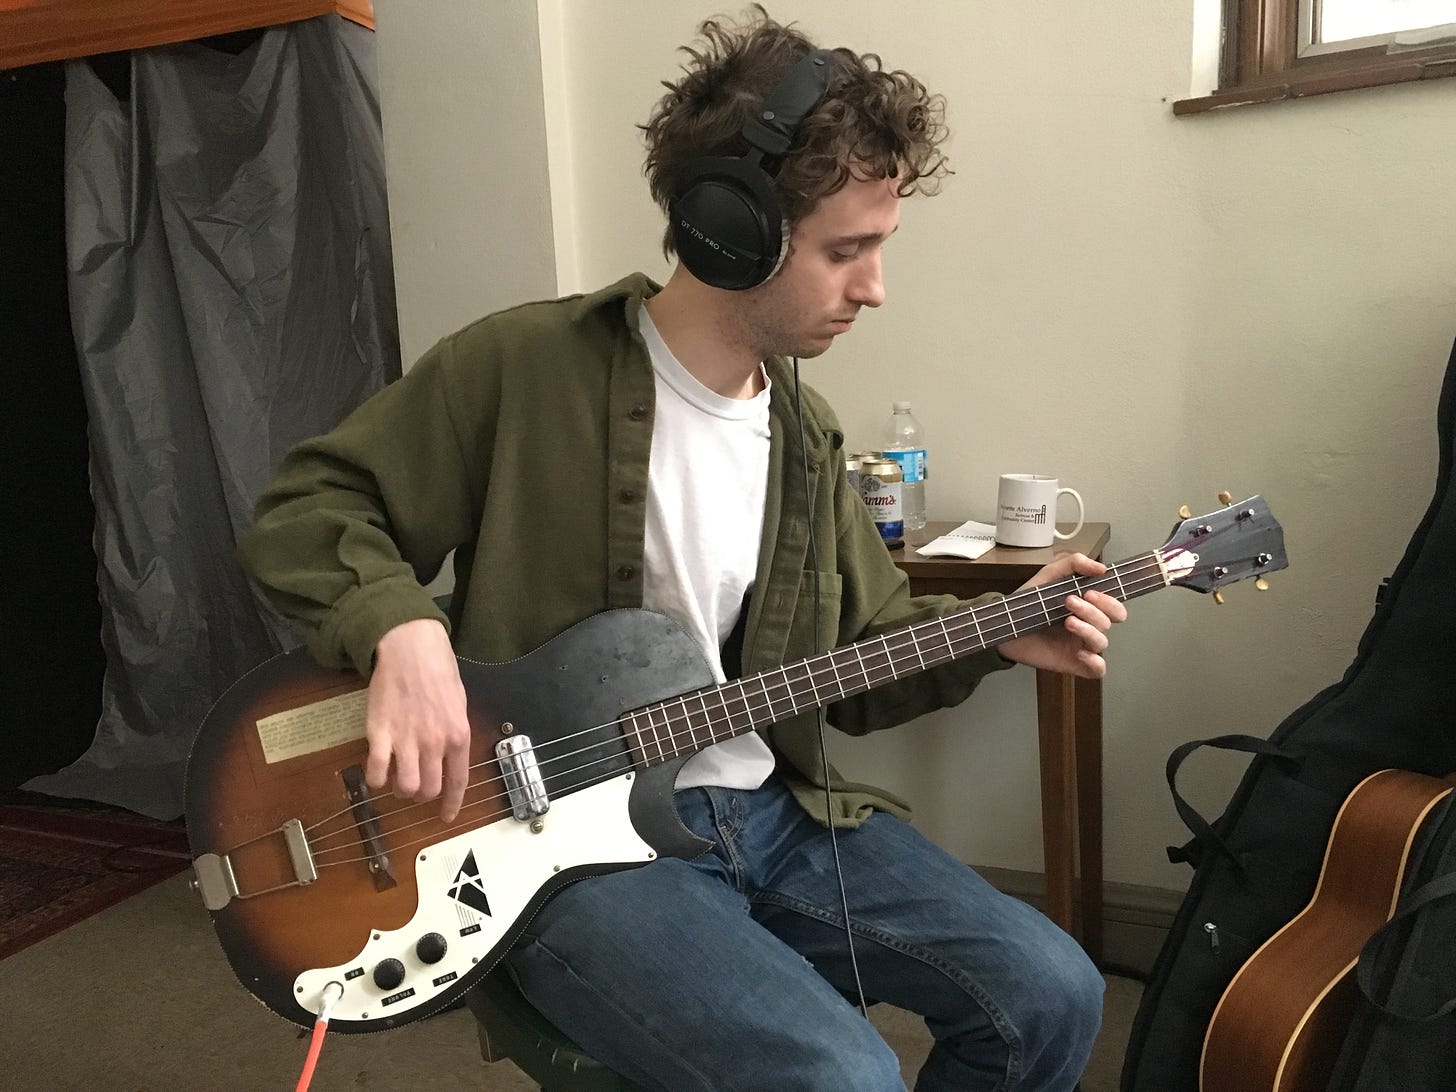 Henry playing a bass guitar in the studio in 2018 or 2019.